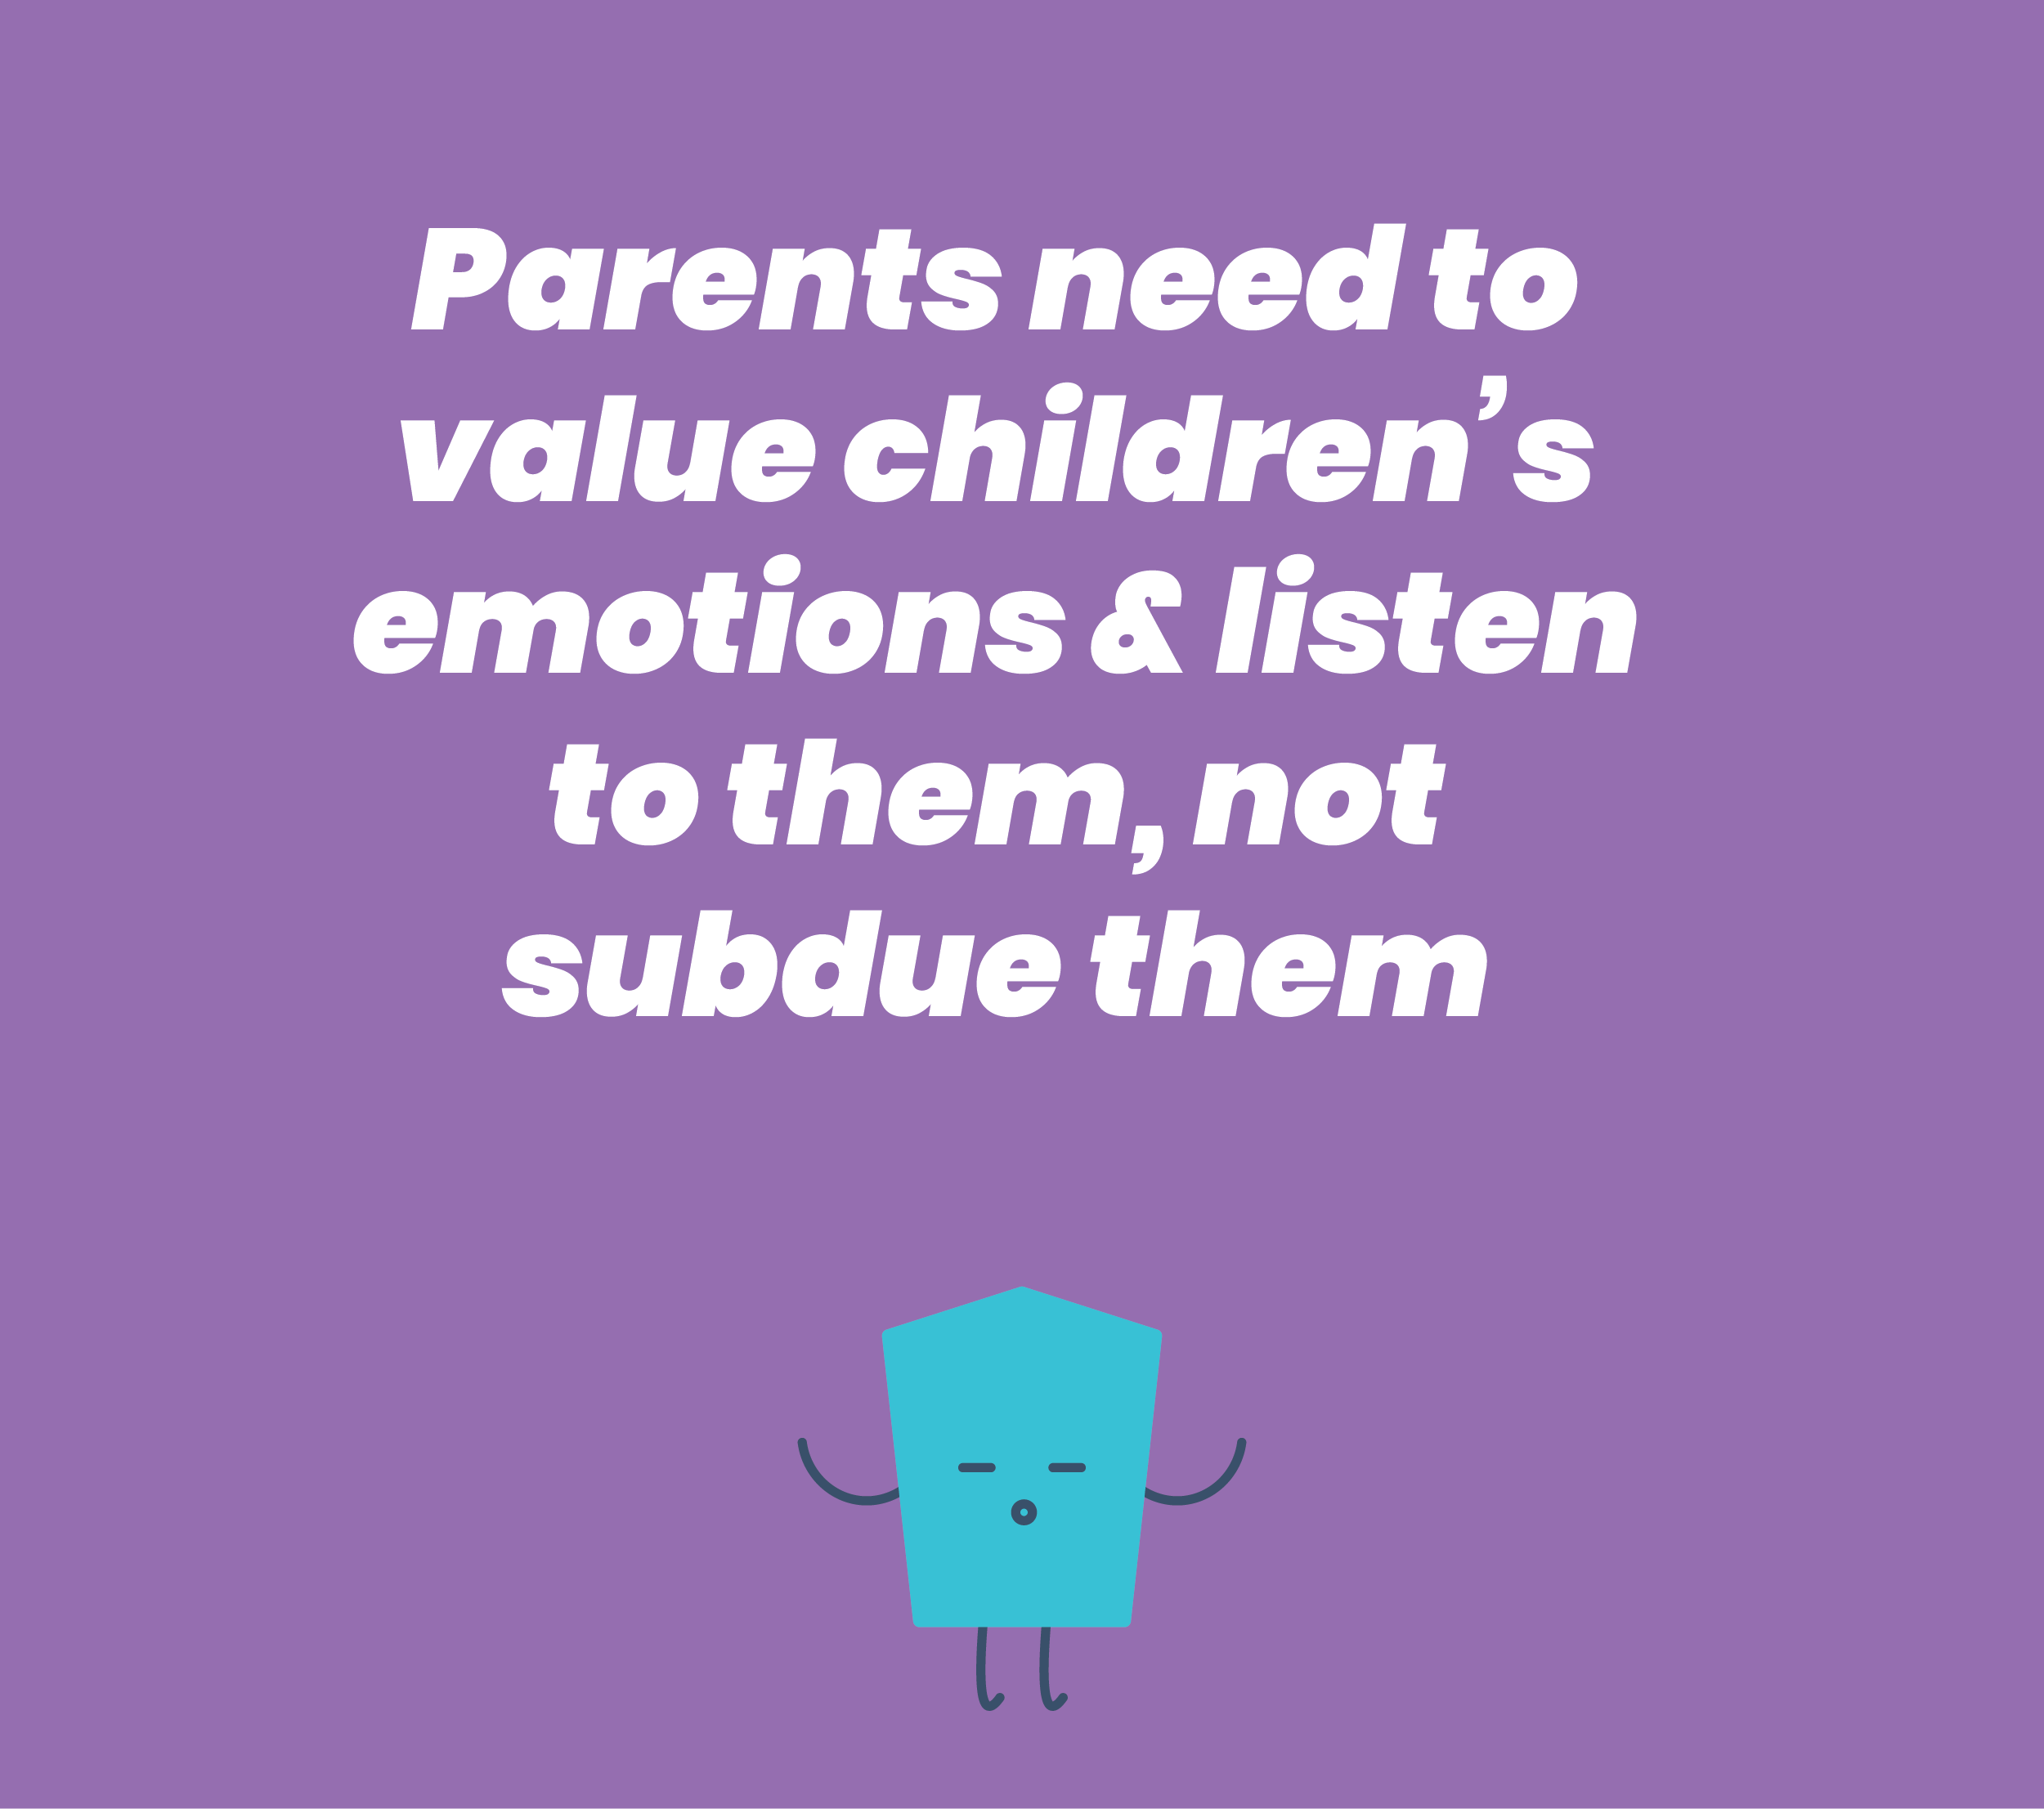 Parents need to value children’s emotions & listen to them, not subdue them